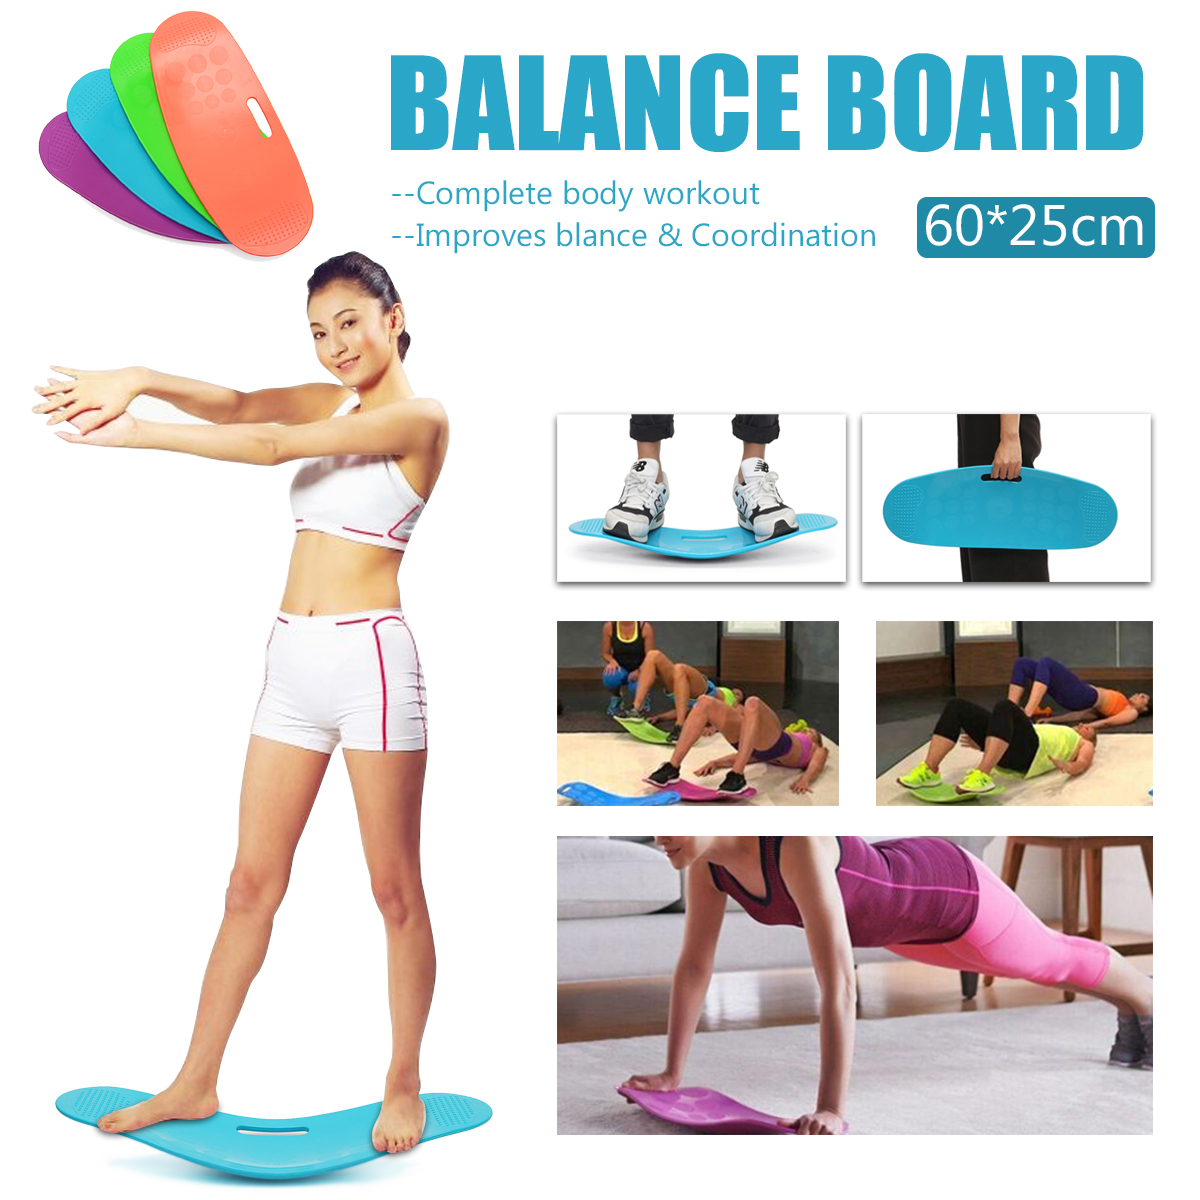 Simply Fit Unisex Yoga Sport Fitness Training Balance Board Exercise Equipment 